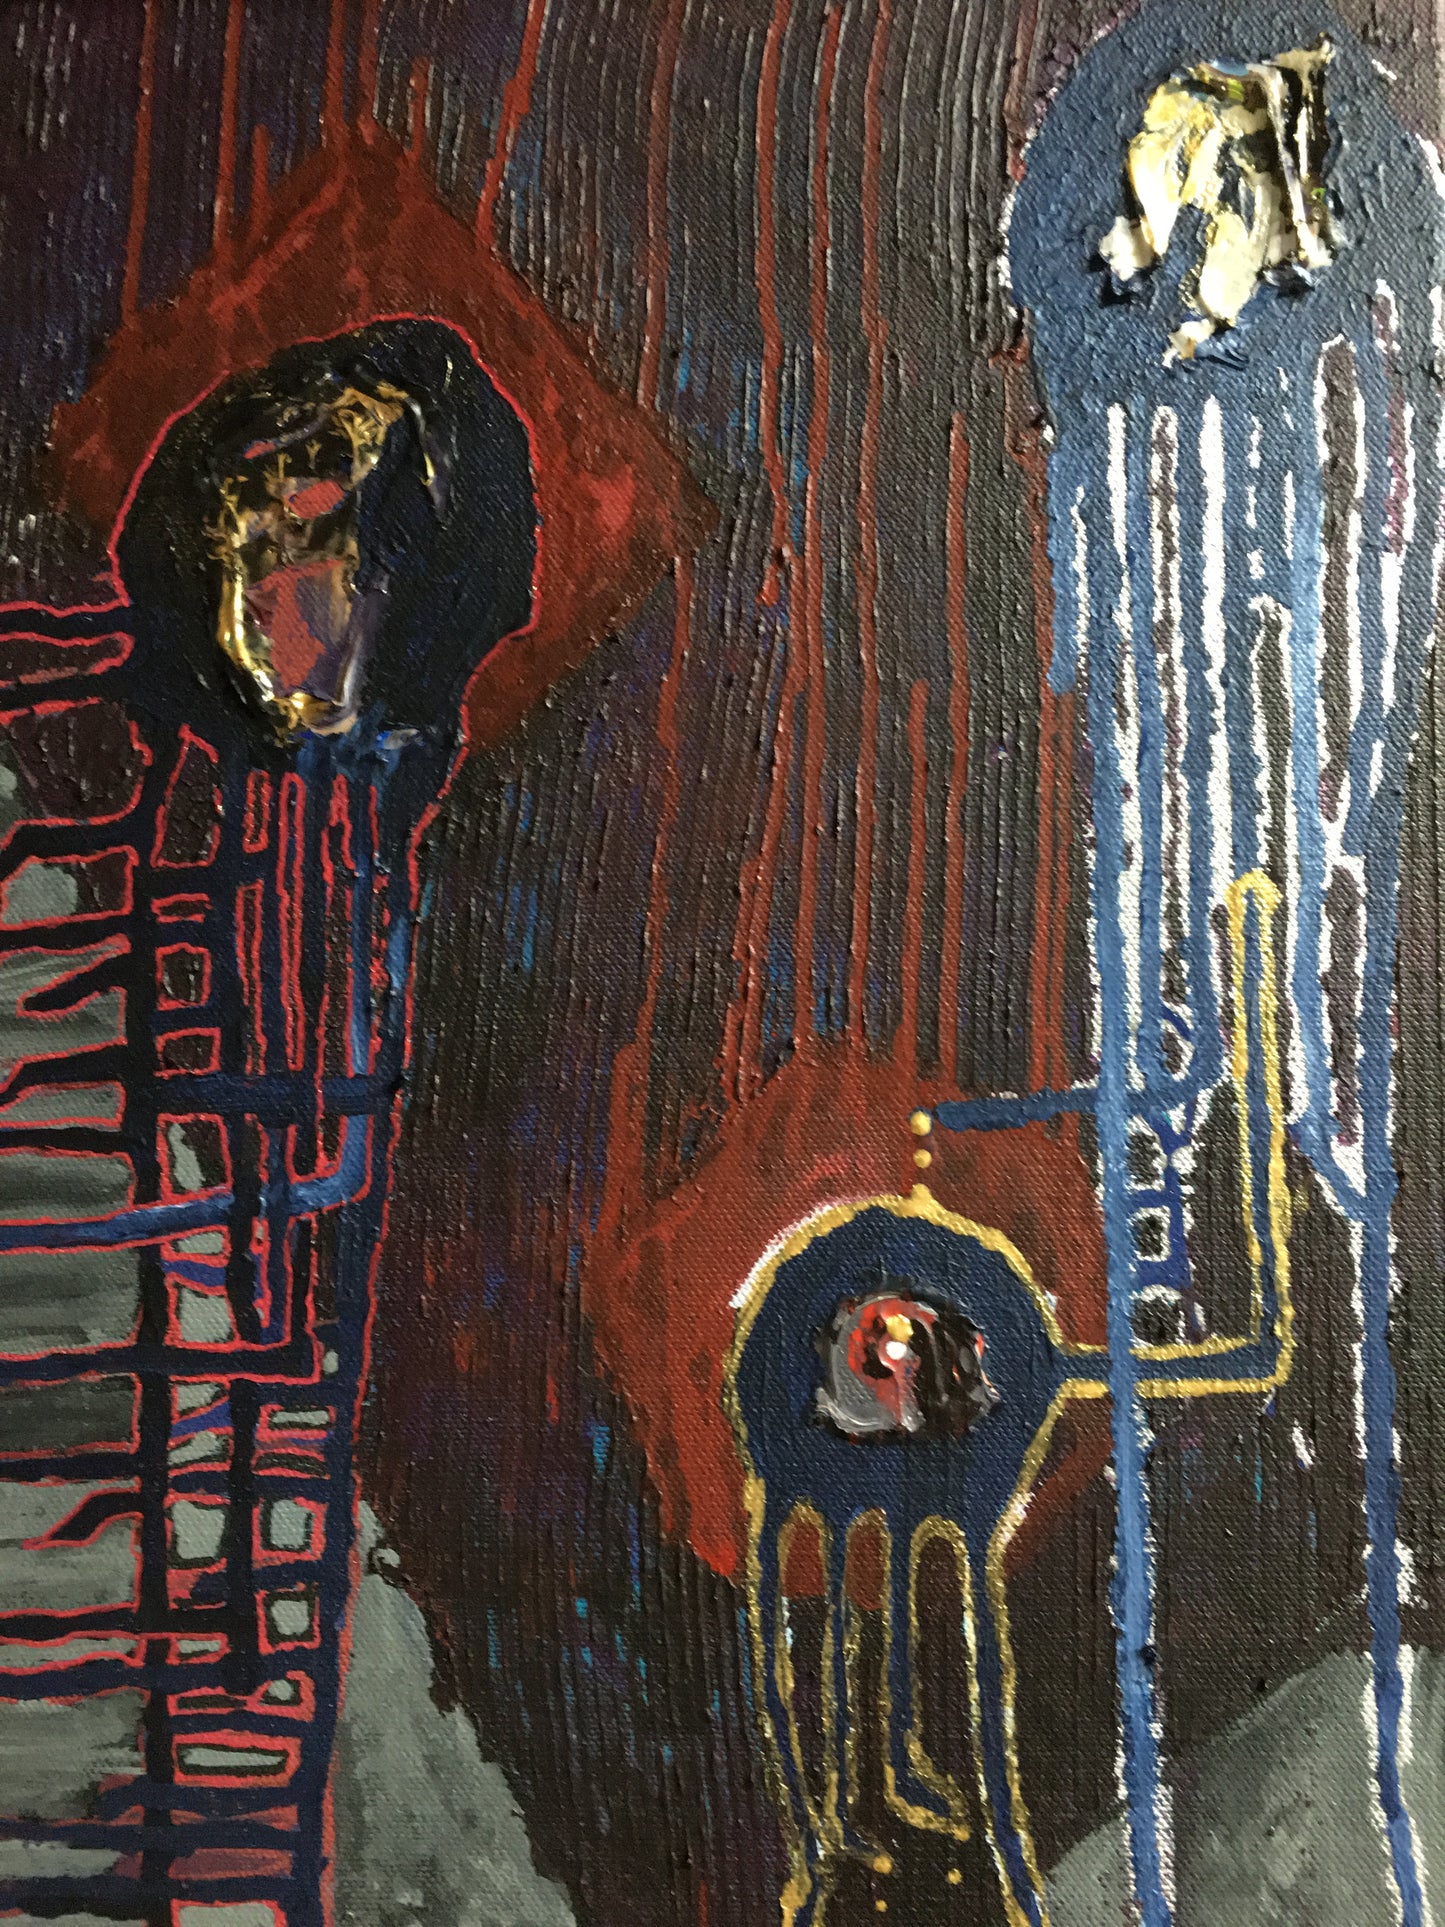 “Cover the Gleen” Mixed Media Painting on Canvas 36”x 18”